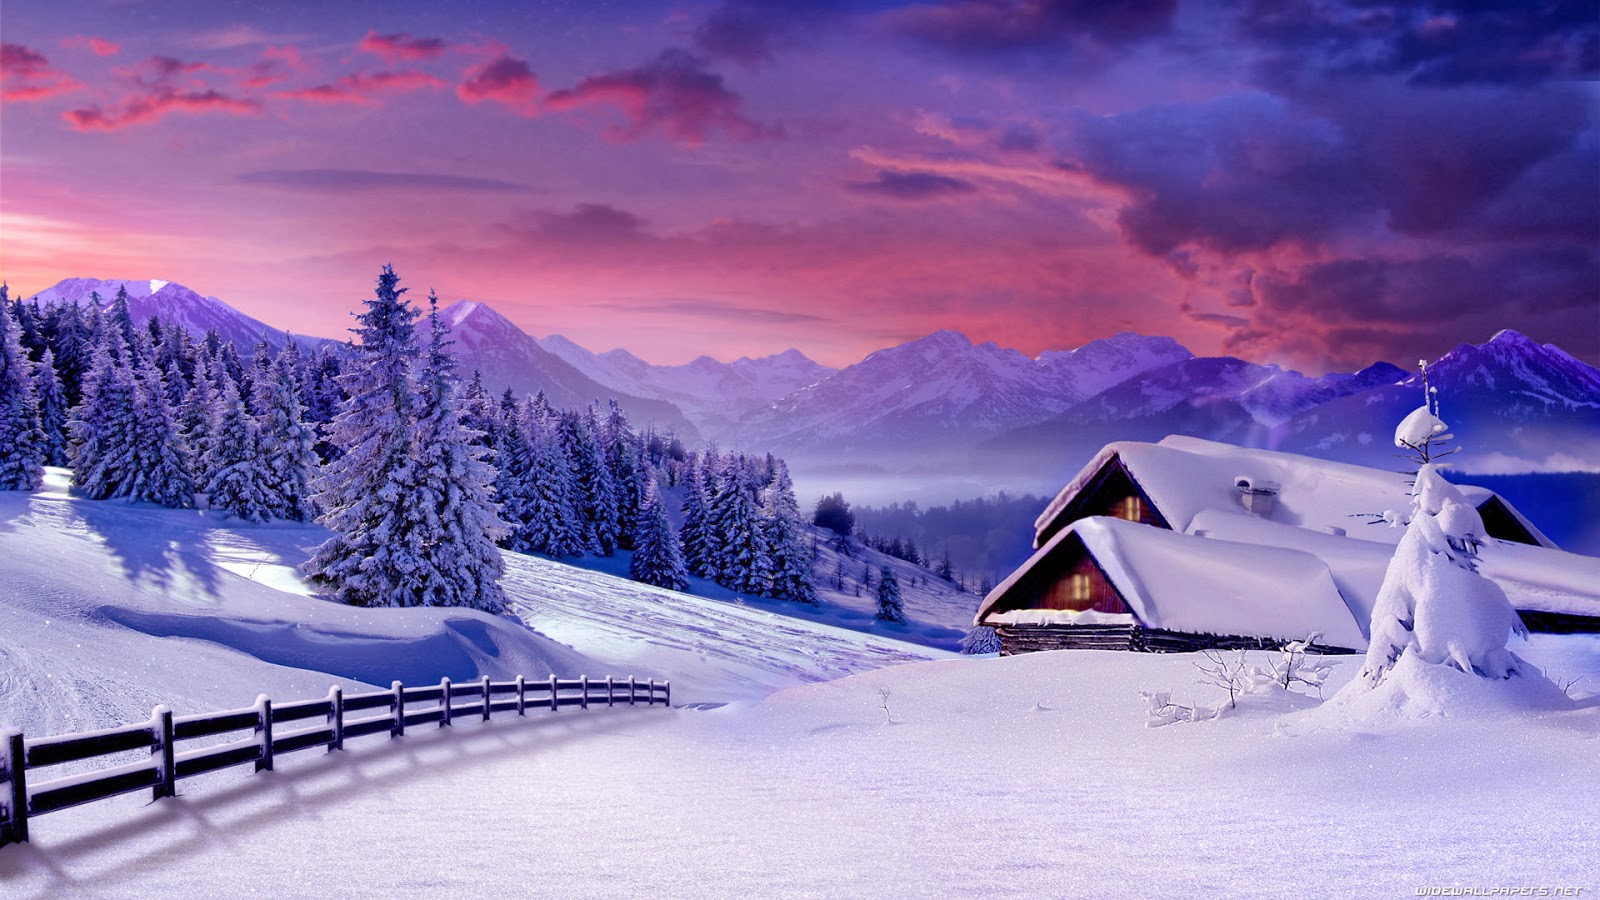 Winter Scene Backgrounds Natural Scenery